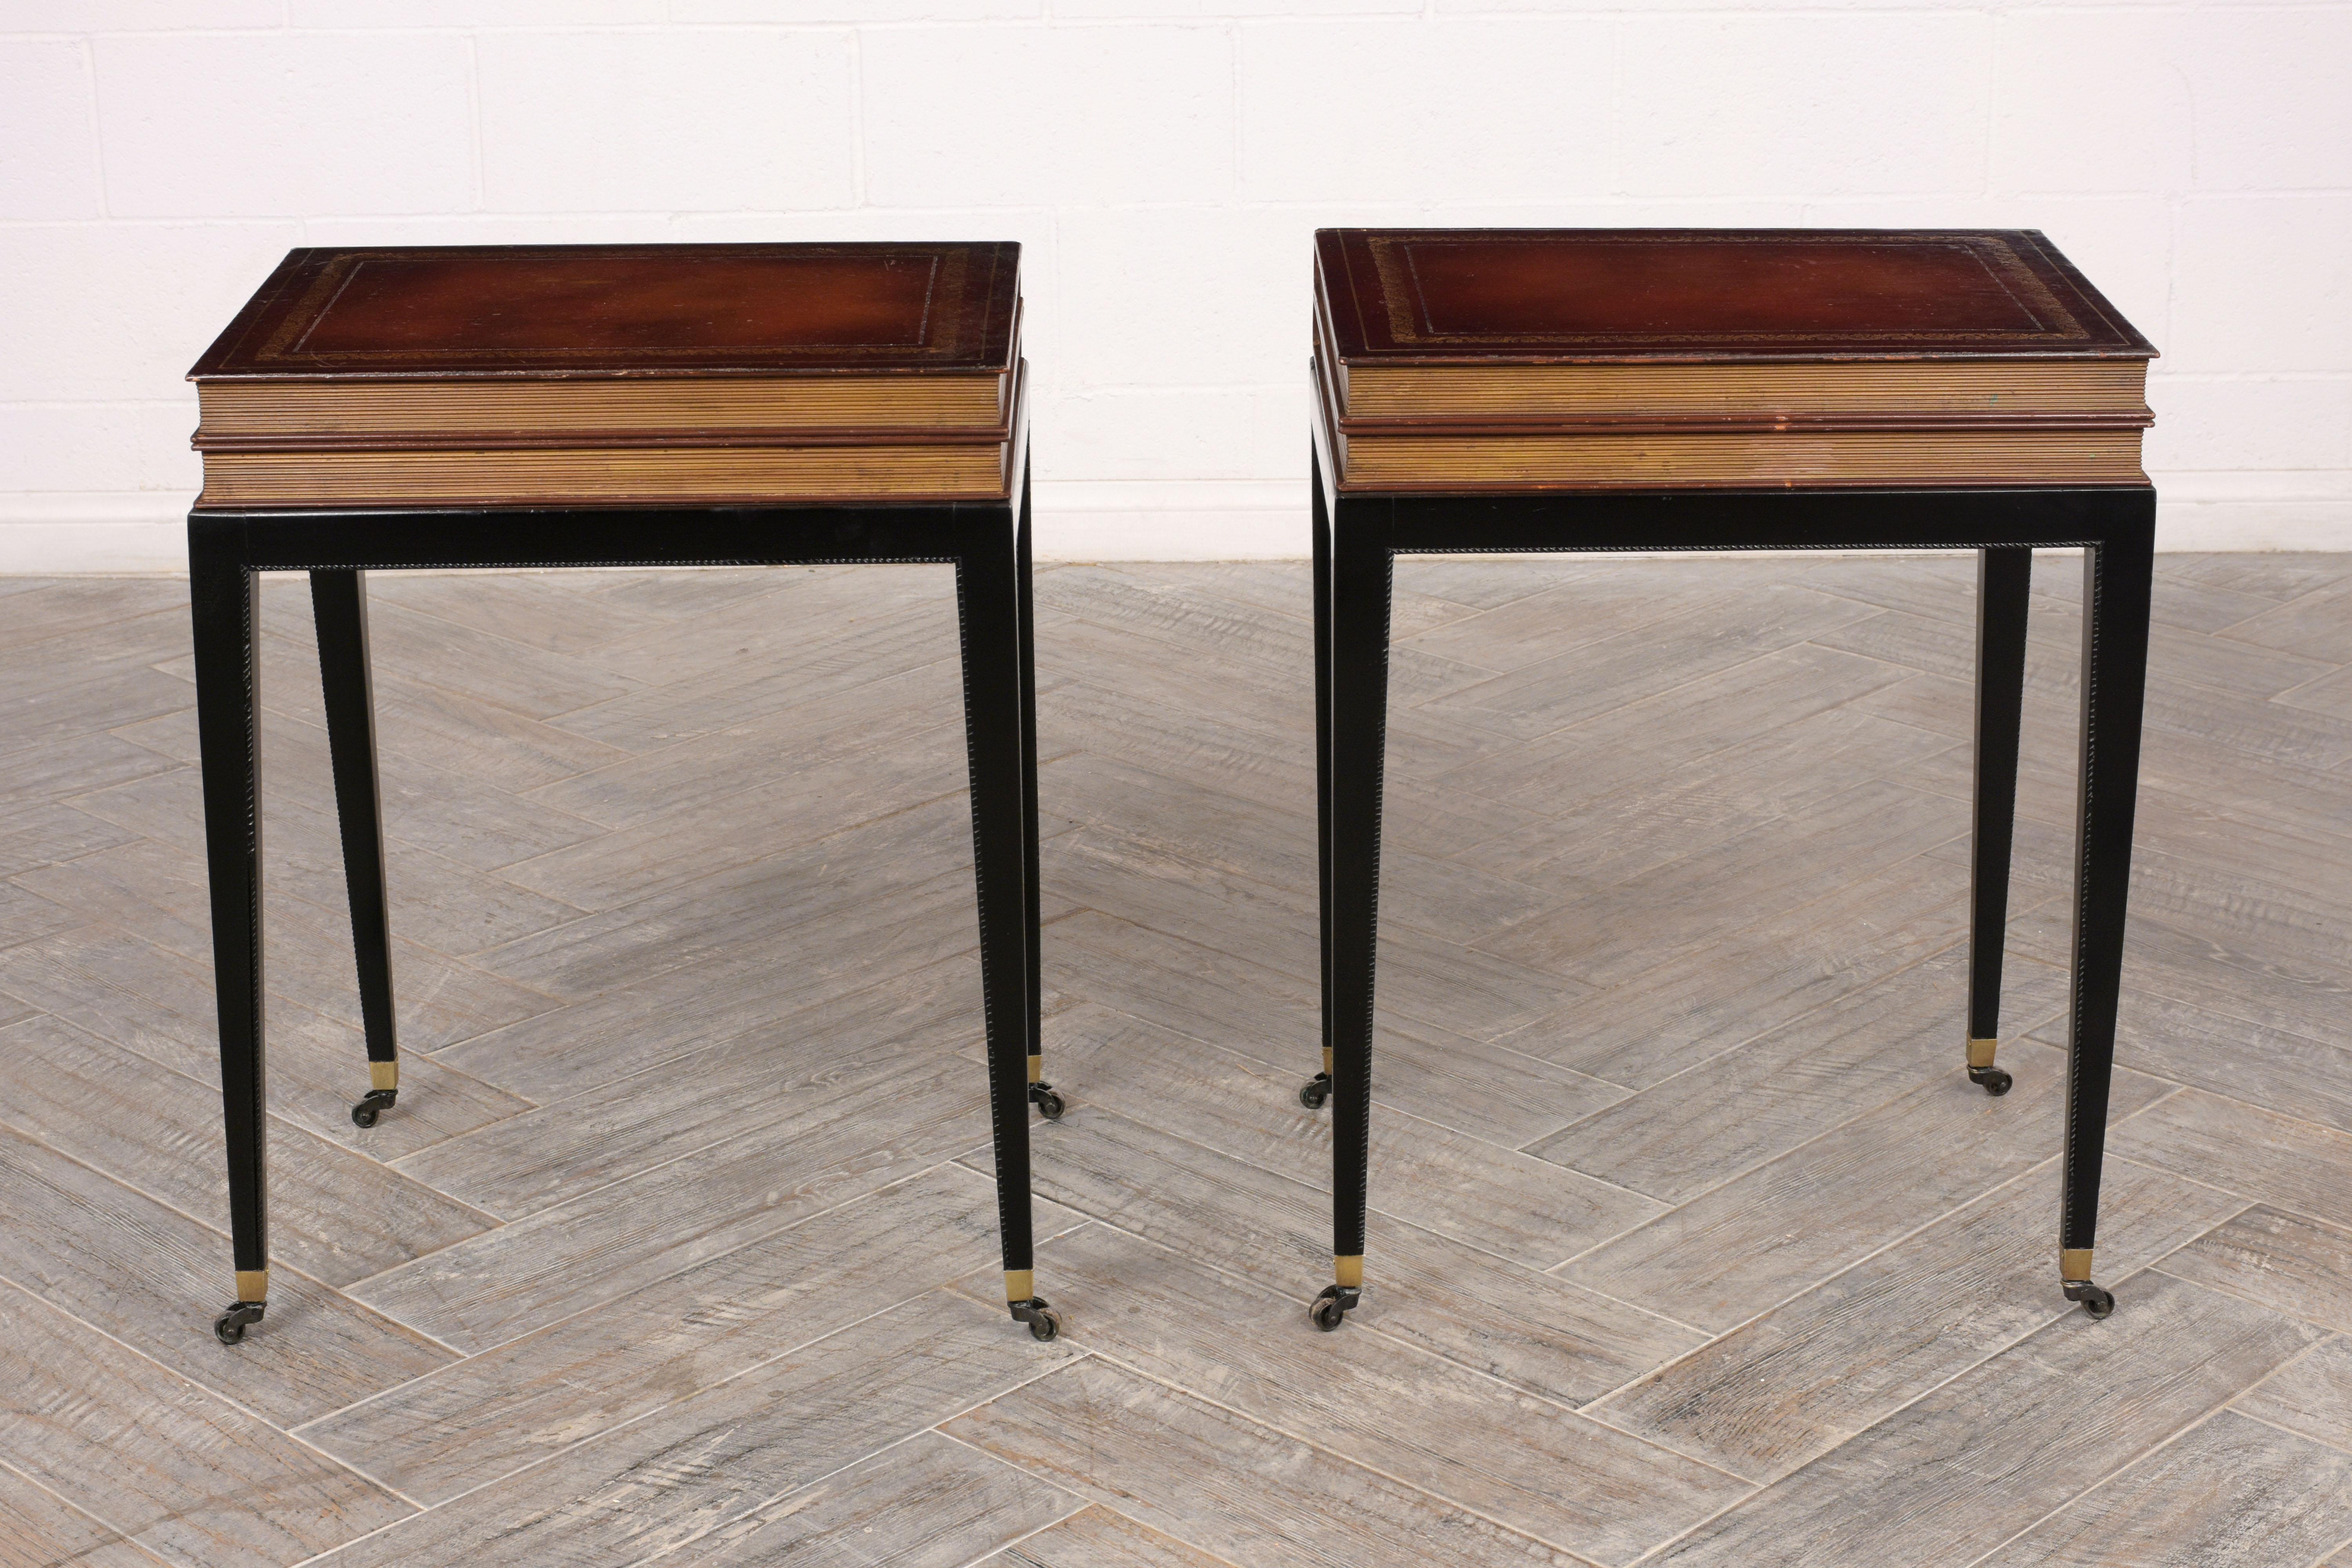 Pair of unique book design side tables. Made from mahogany, top book design has original paint and details, base and legs, are newly stained in a rich ebonized color with a lacquered finish. Features a top drawer that can be opened from the sides.